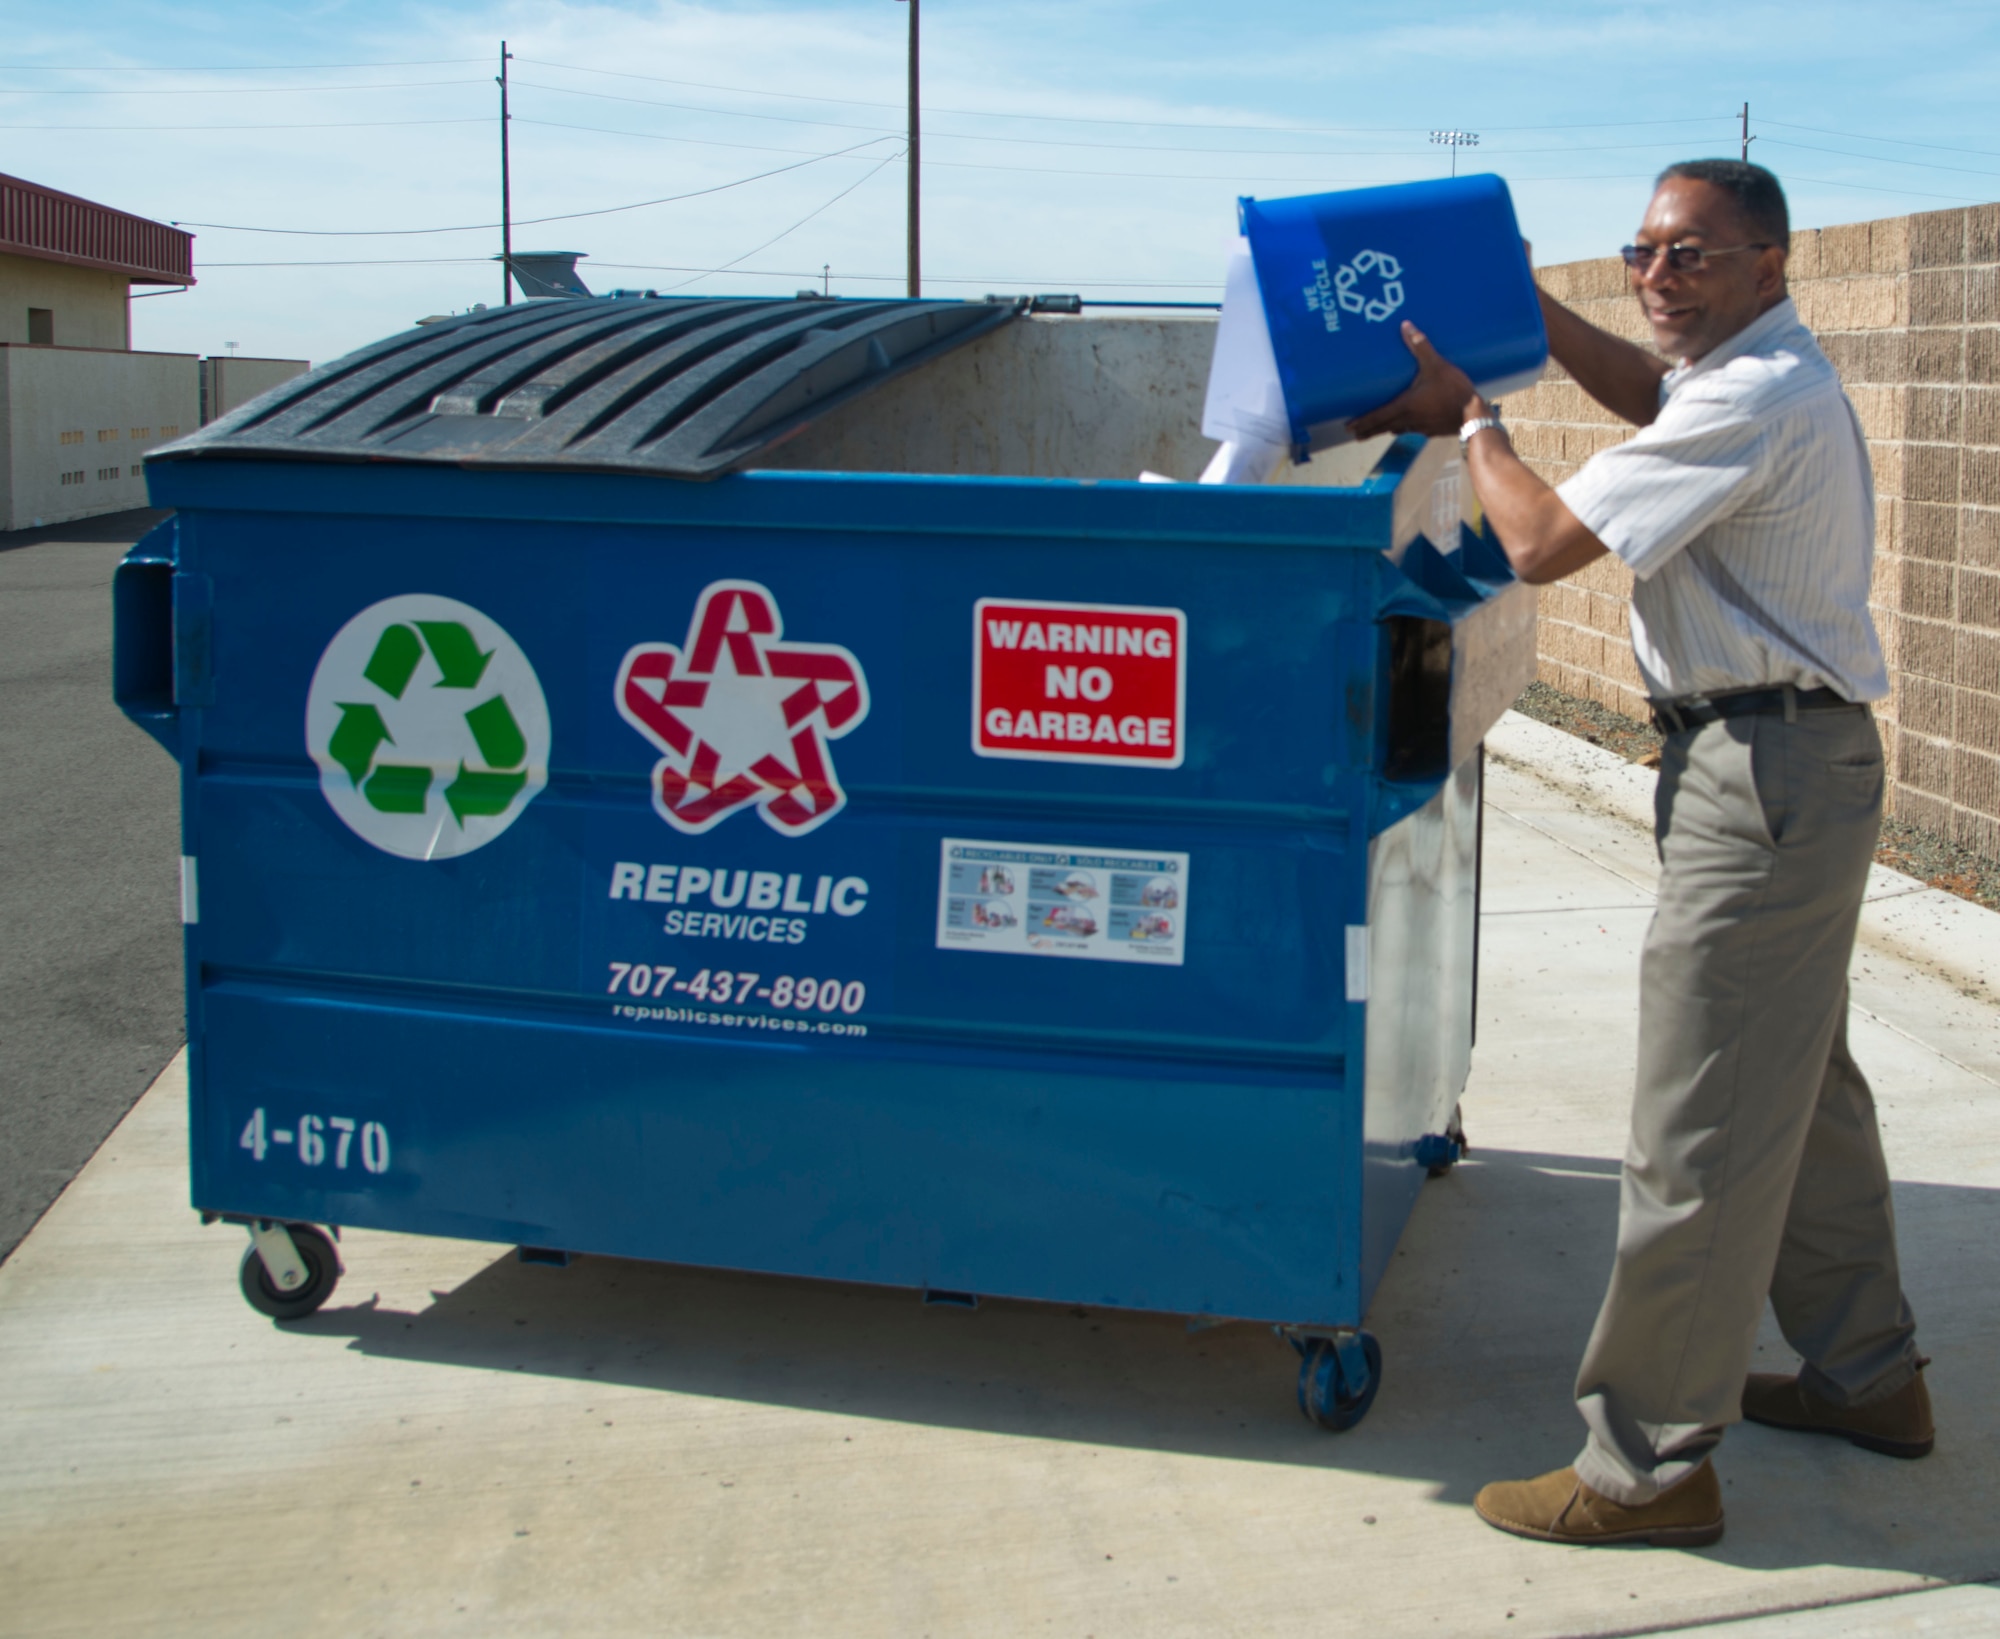 Arvey Andrews, 60th Civil Engineer Squadron facility manager for building 570, recycles old paper into the new, blue recycling bin April 3 on Travis Air Force Base, Calif. The blue recycling bins will start being distributed around base. (U.S. Air Force photo/Airman 1st Class Nicole Leidholm)